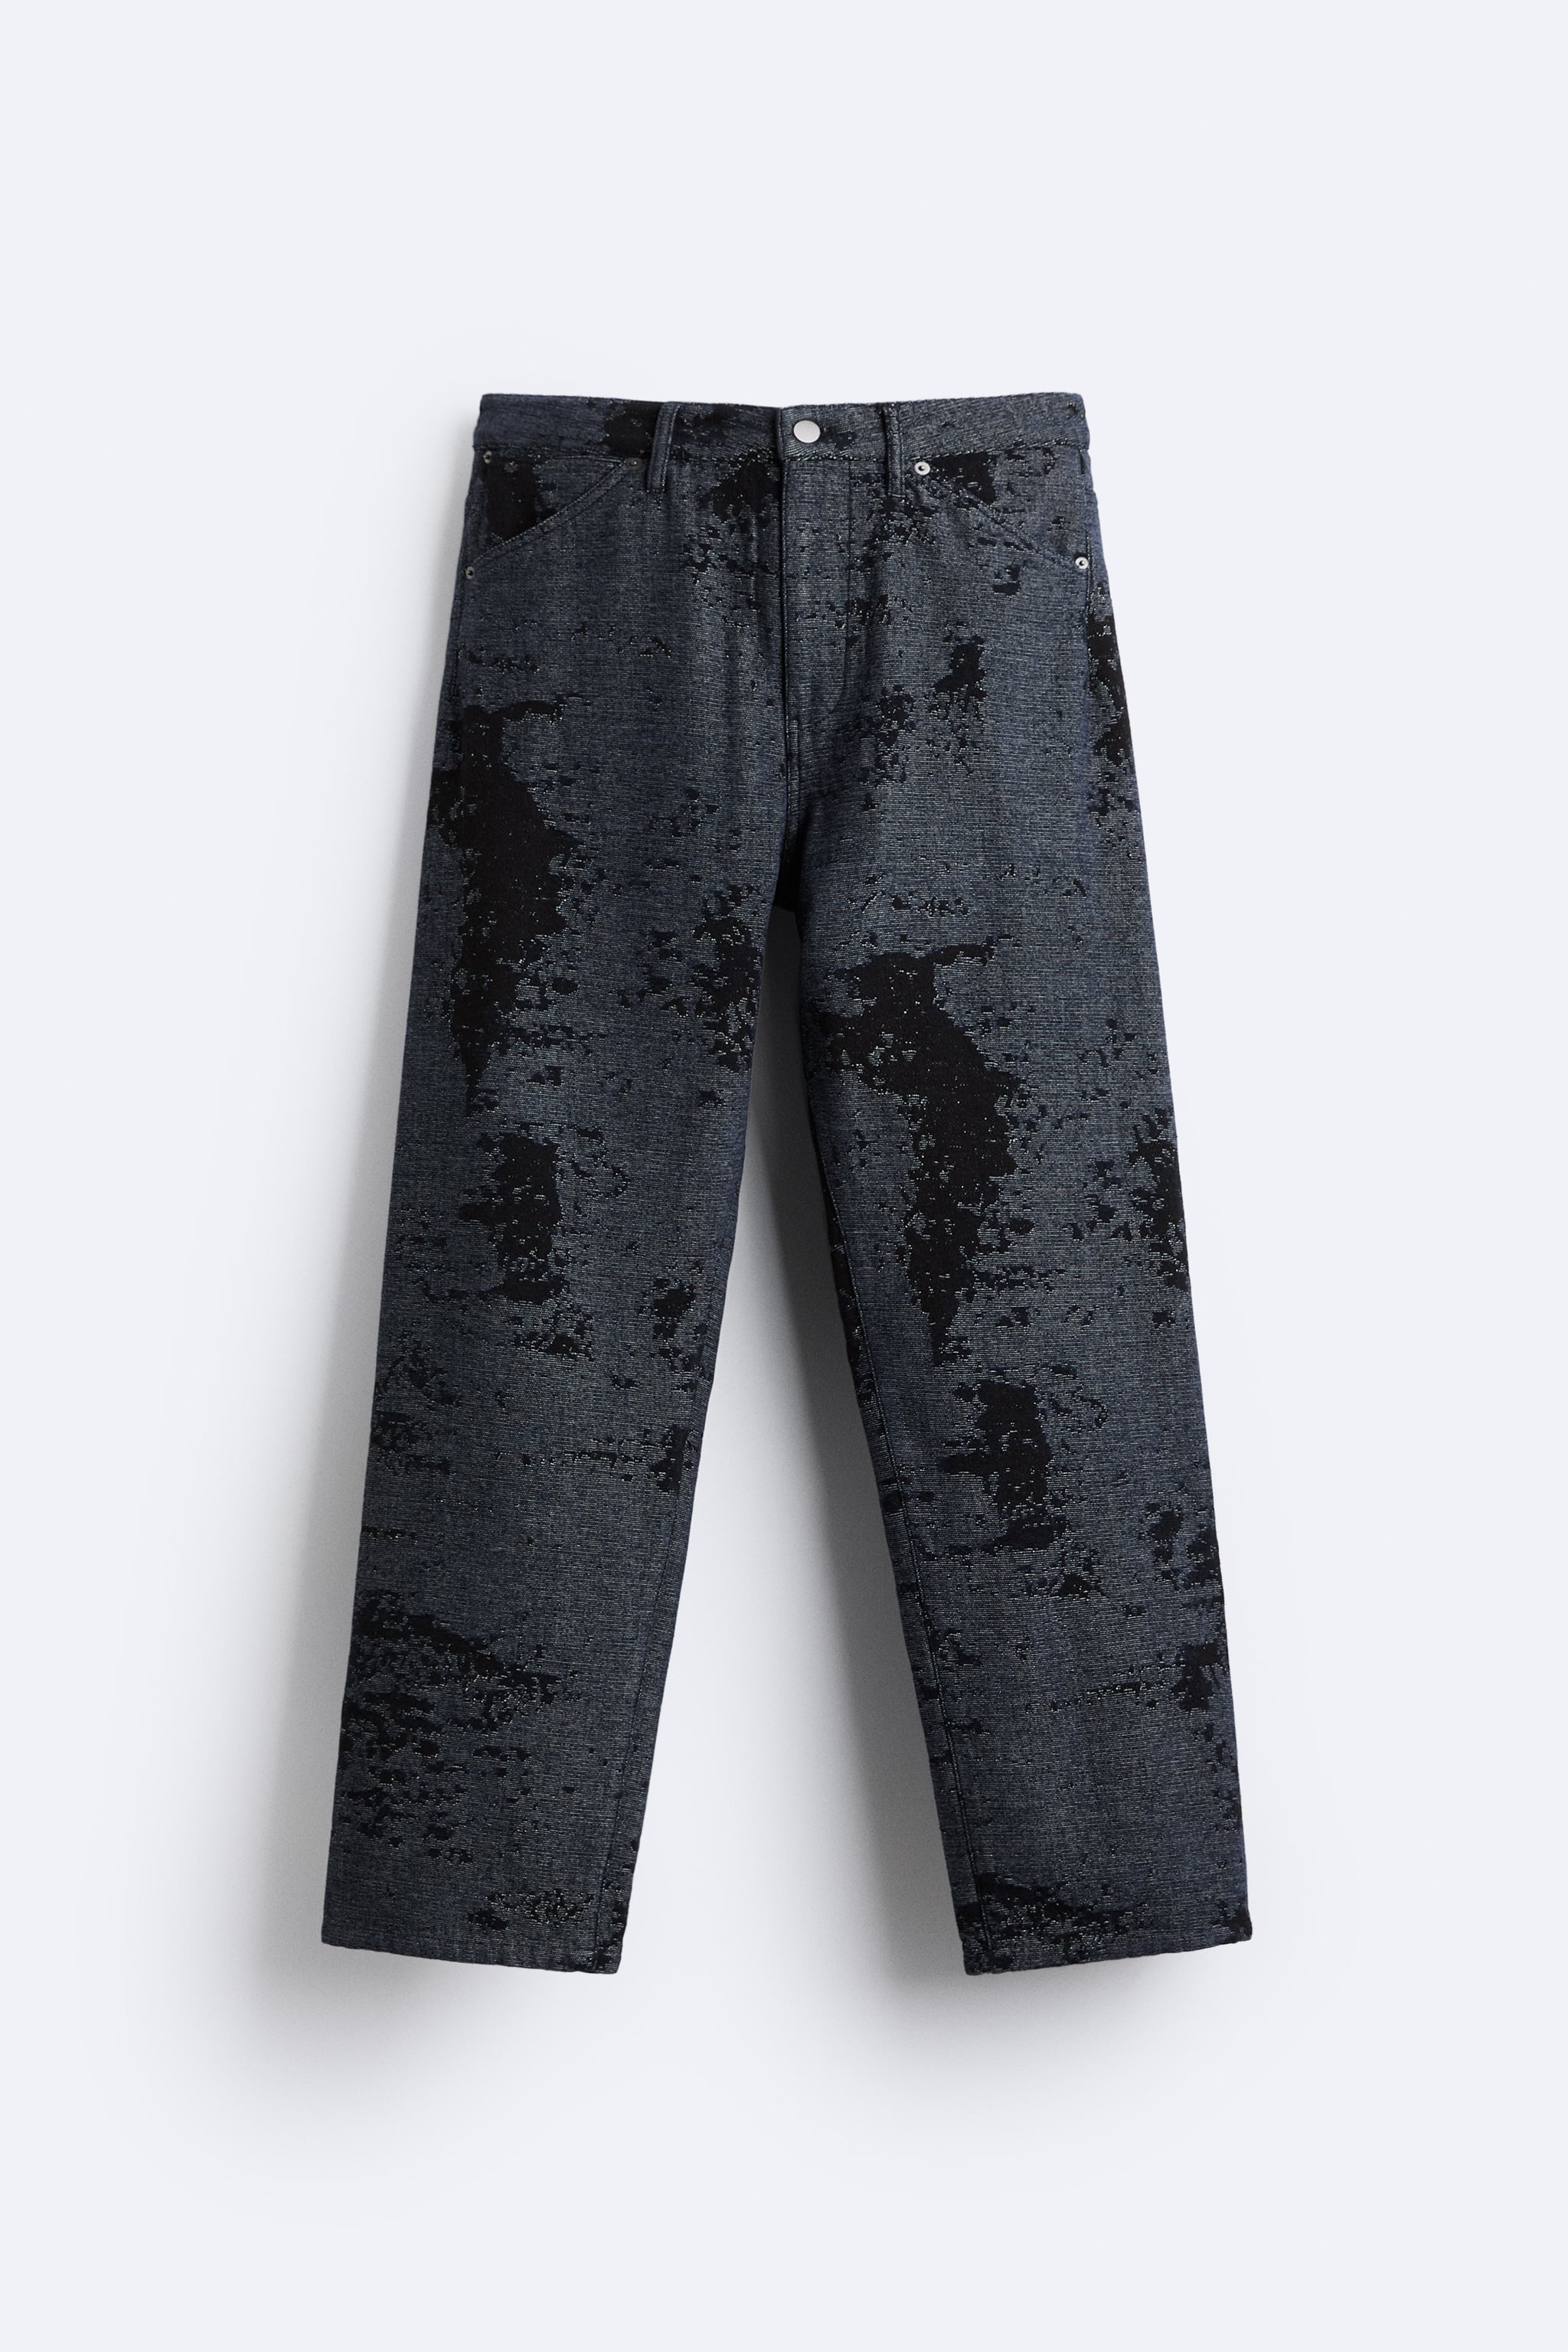 ABSTRACT JACQUARD JEANS